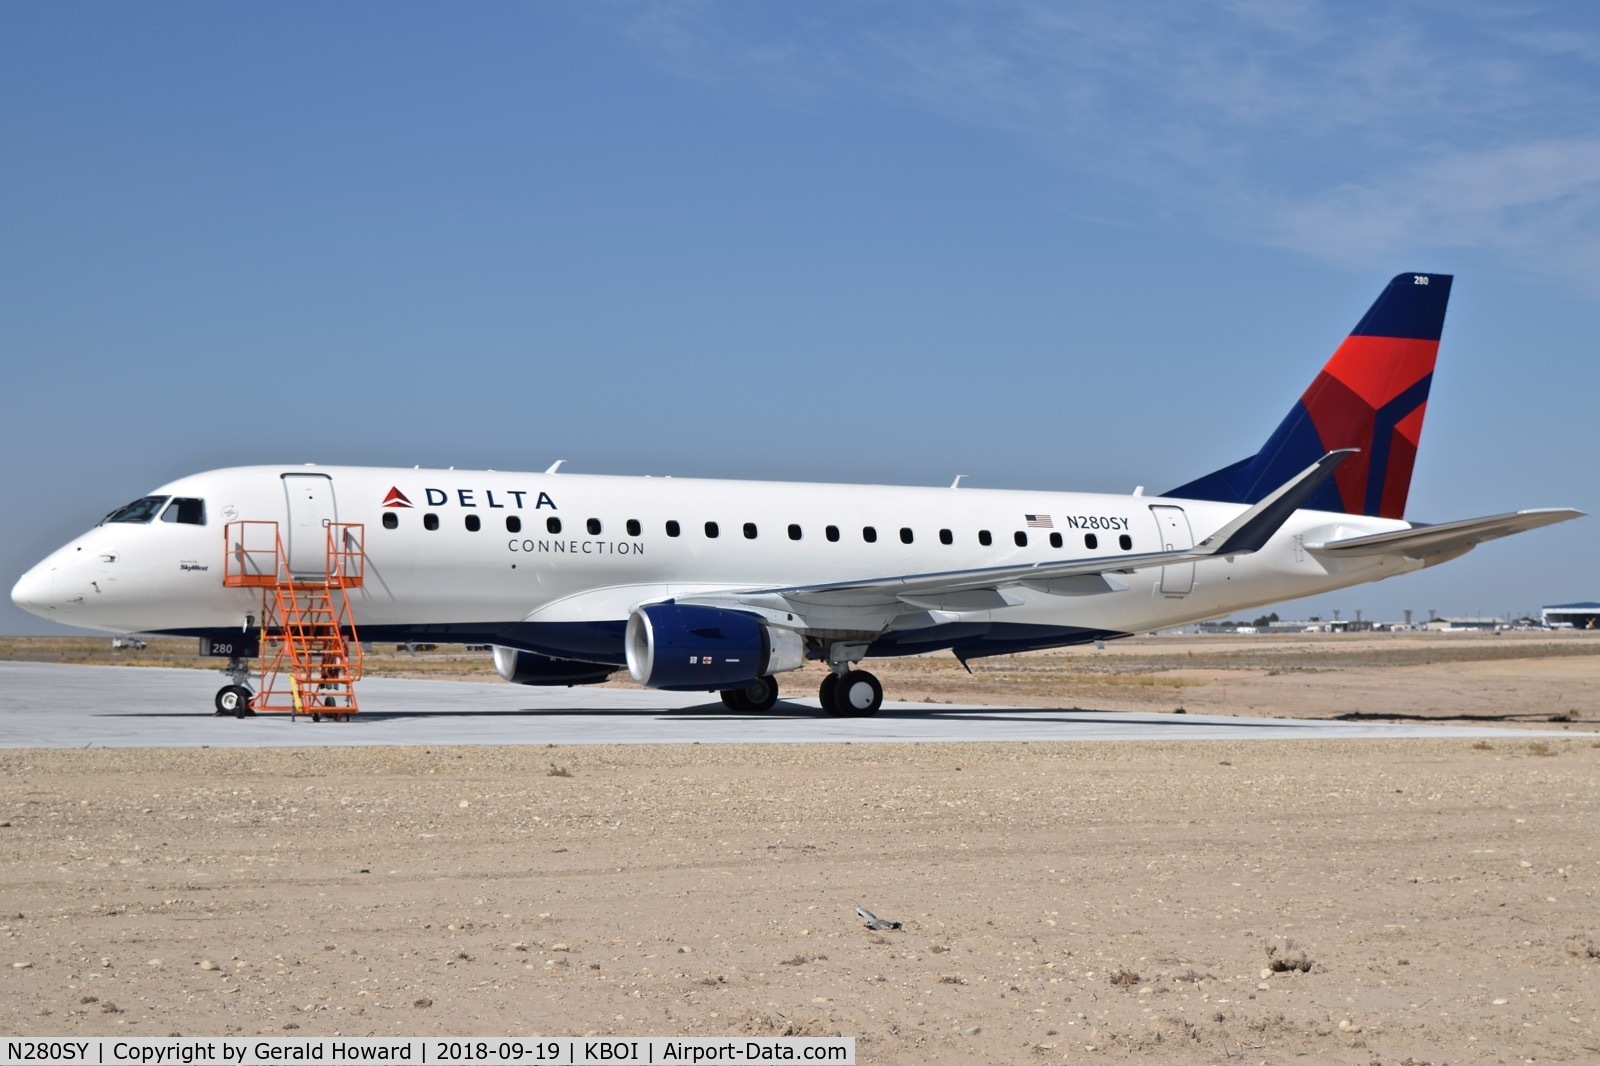 N280SY, 2018 Embraer 175LR (ERJ-170-200LR) C/N 17000745, Parked on the Skywest maintenance ramp. Fresh from the factory.